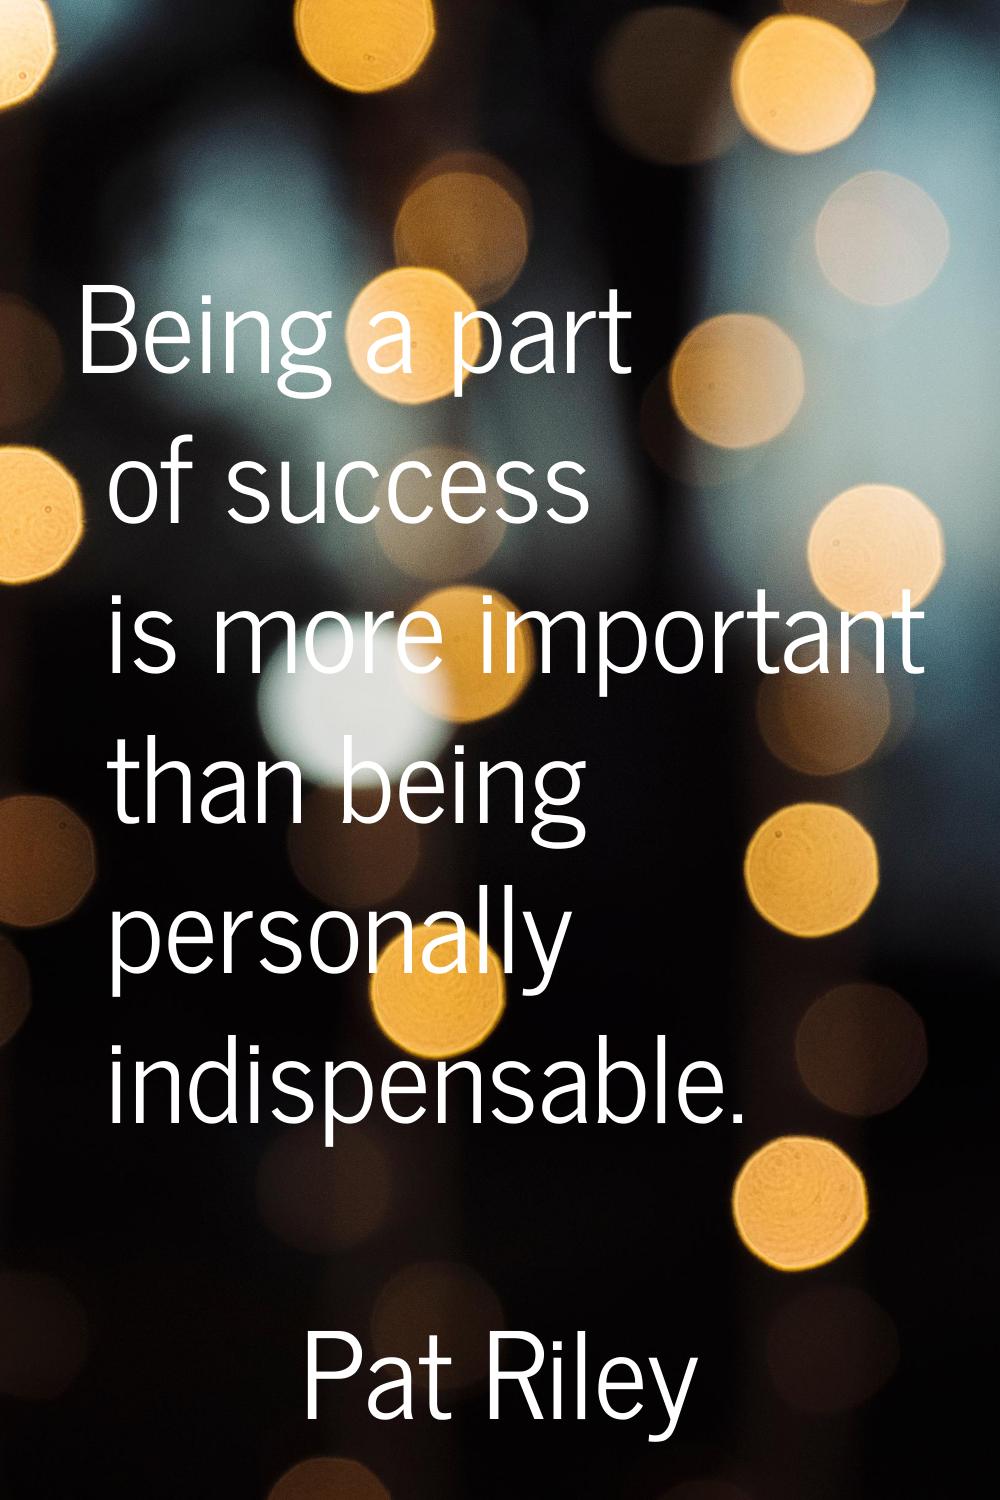 Being a part of success is more important than being personally indispensable.